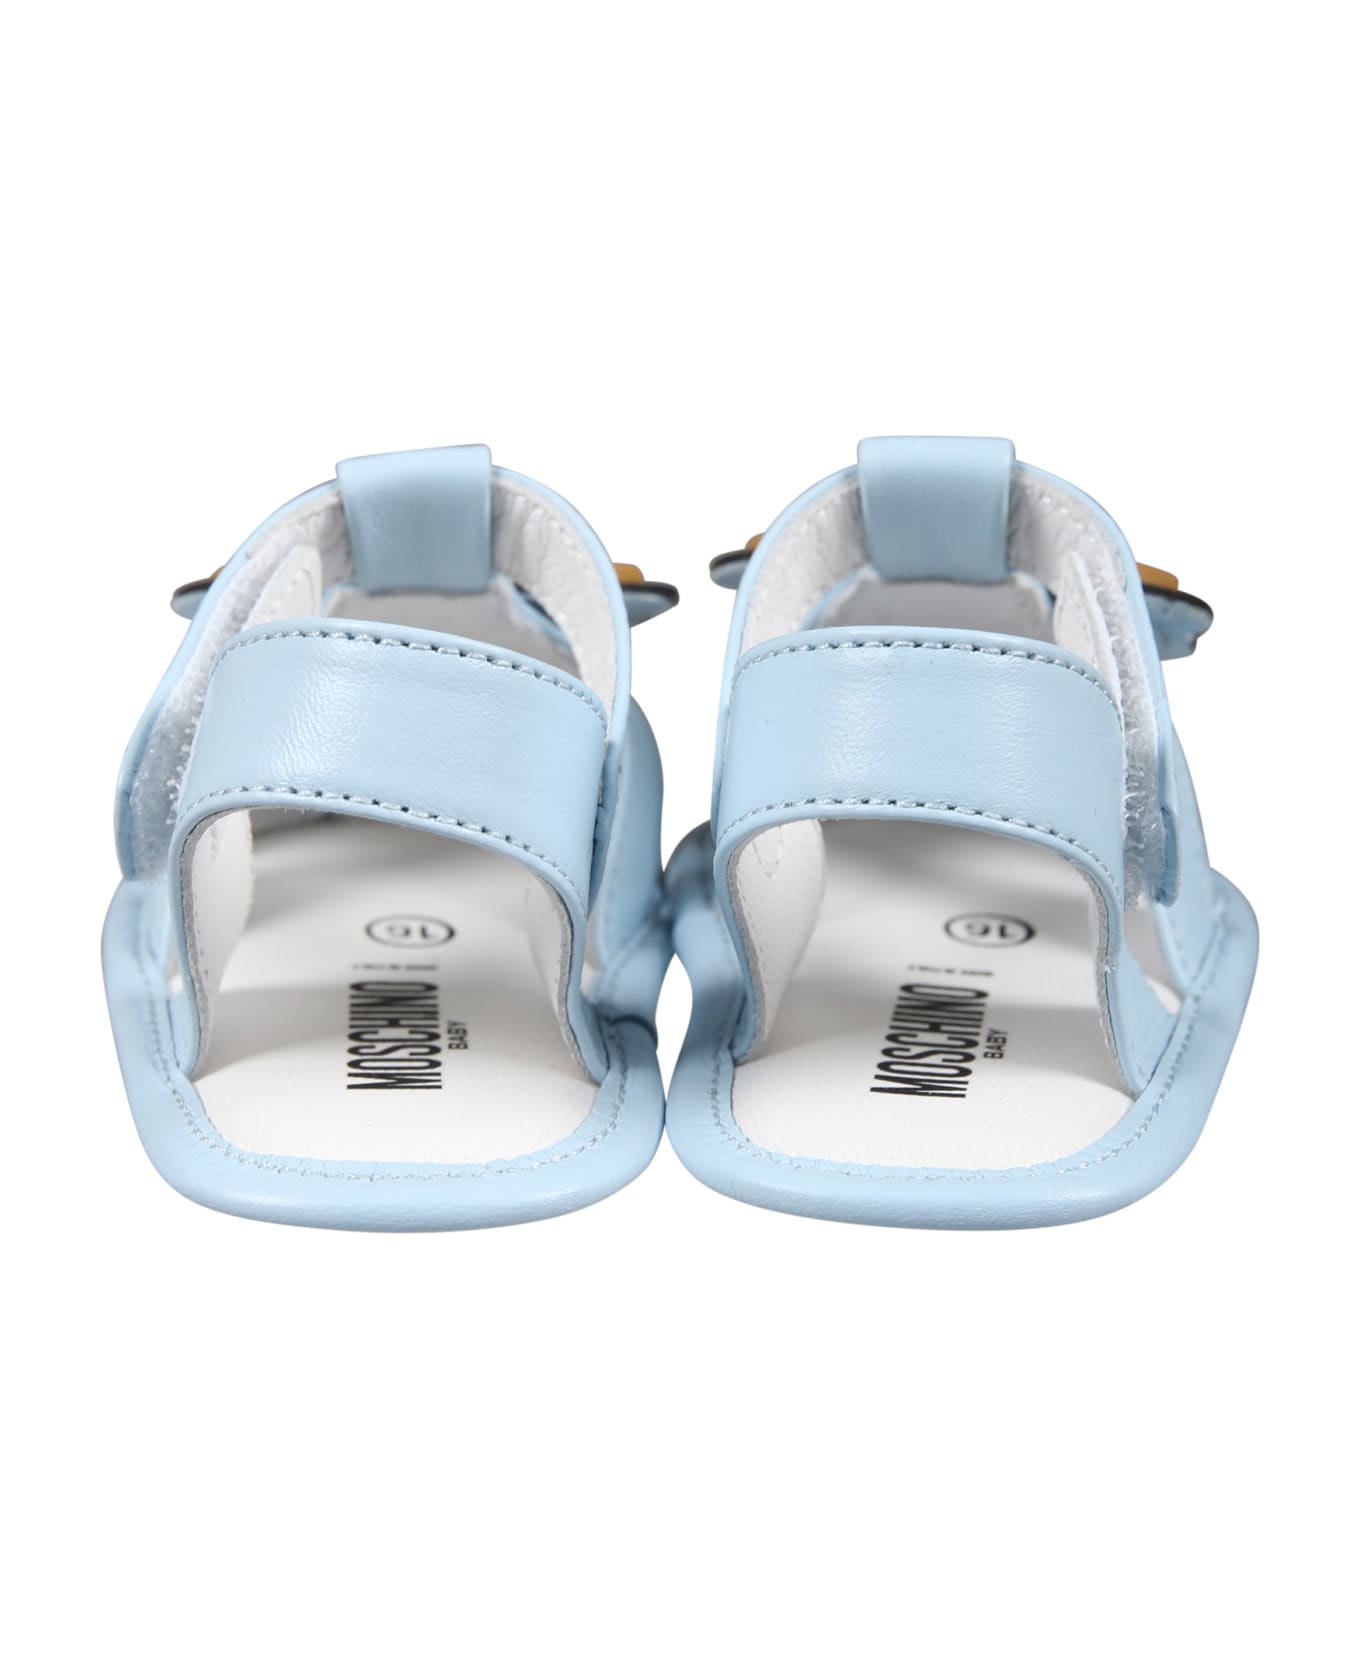 Moschino Light Blue Sandals For Baby Boy With Teddy Bear - Light Blue シューズ